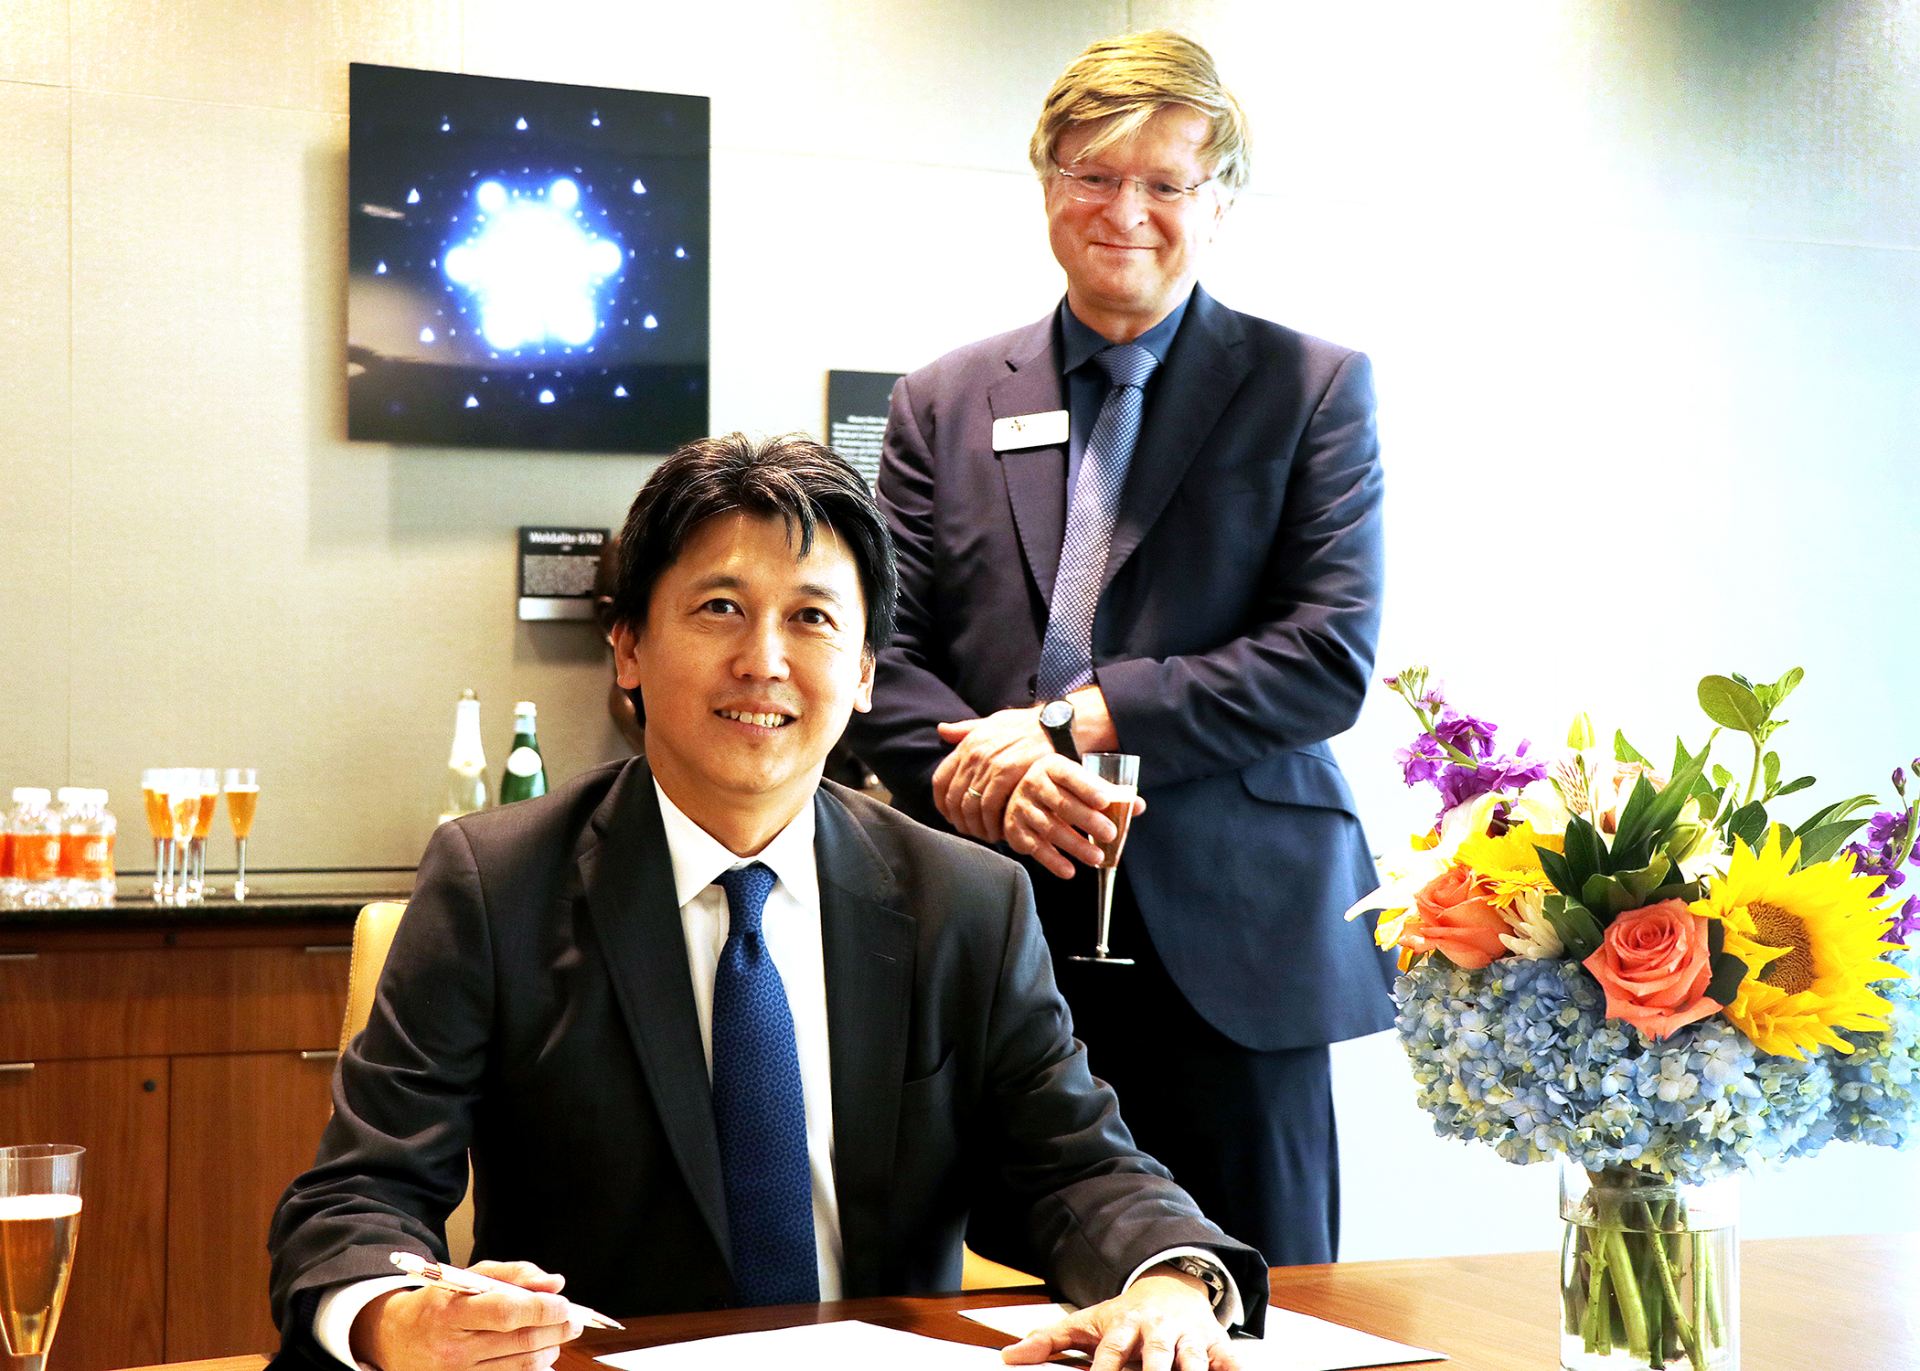 William Huang and Dr. Skinner pose for a photo at a desk.